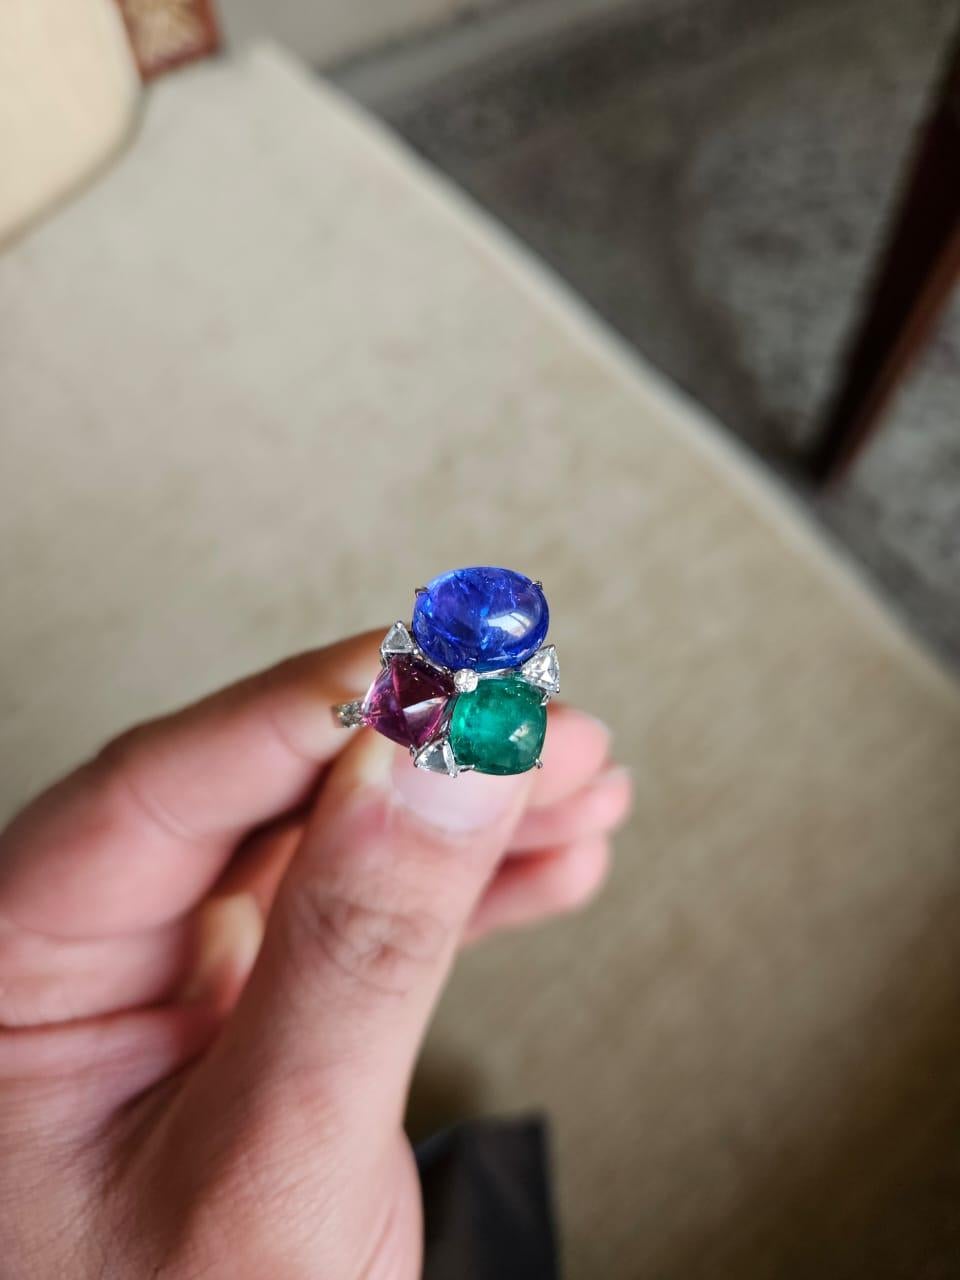 A very stunning & gorgeous, modern style, Emerald, Rubellite & Tanzanite Cocktail Ring set in 18K White Gold & Diamonds. The weight of the Emerald is 2.14 carats. The Emerald is completely natural, without any treatment and is of Zambian origin. The